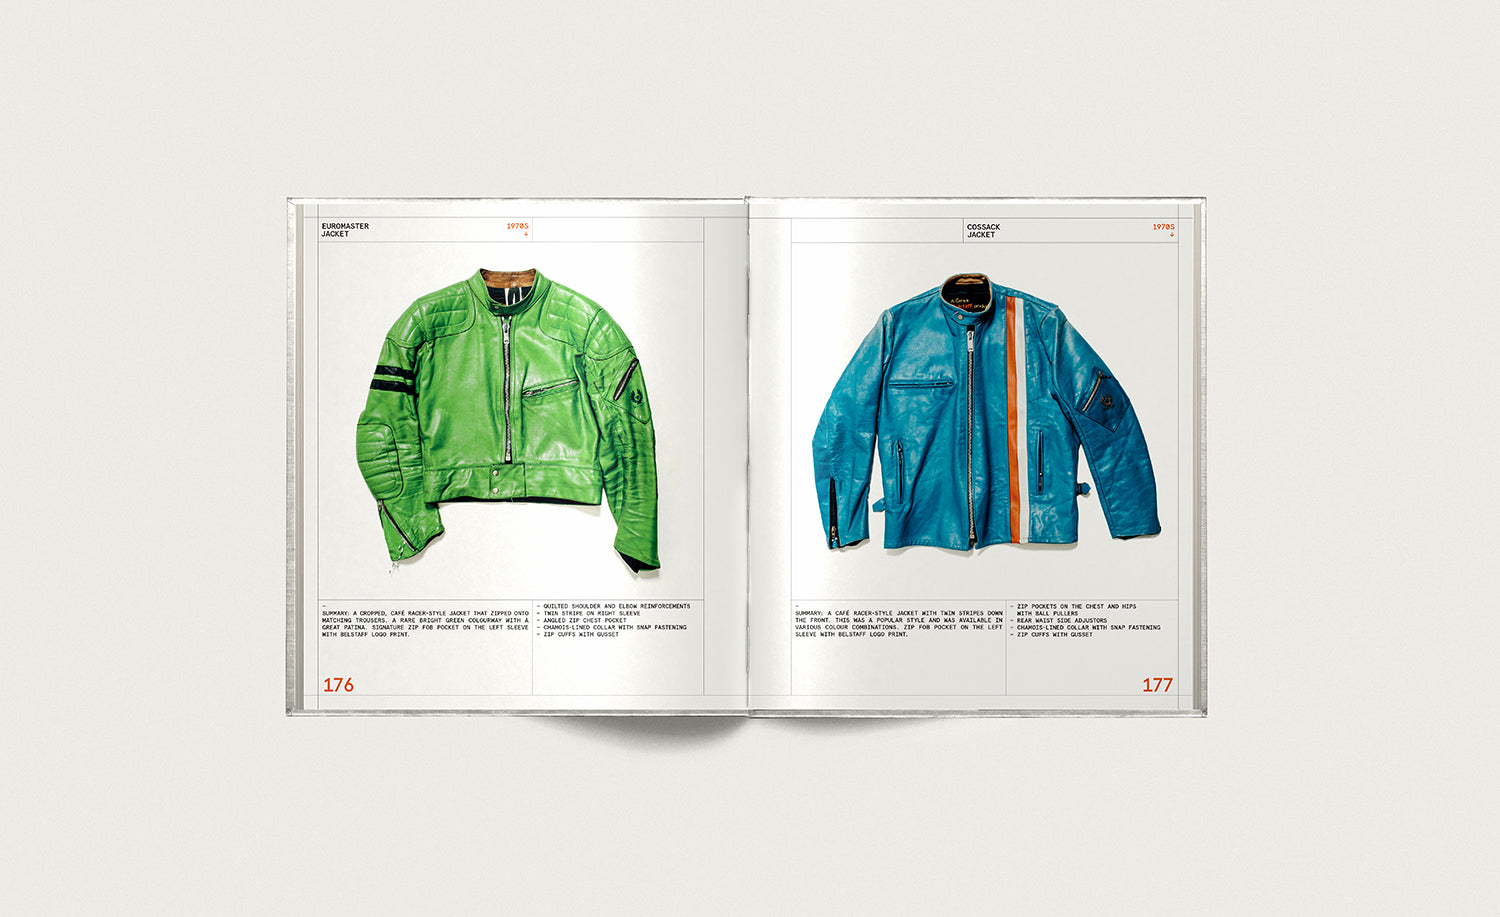 The Belstaff: Our First 100 Years book flipped open to two pages with a green and blue vintage motorcycle jacket